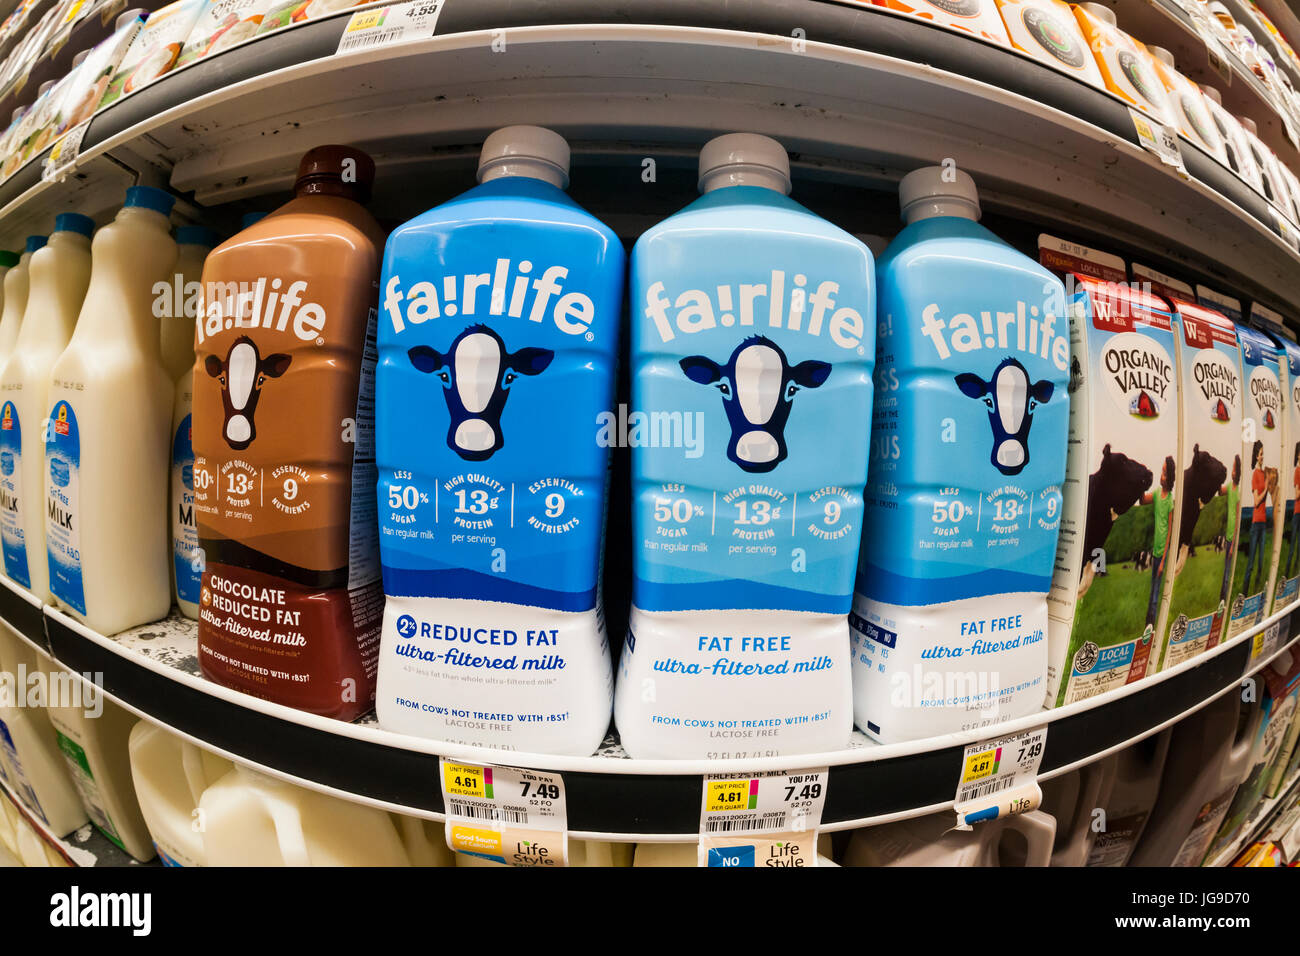 Containers of Coca-Cola's Fairlife premium 'supermilk' in a supermarket cooler in New York on Thursday, June 29, 2017. The premium beverage is lactose-free and contains more protein and calcium and less sugar than regular milk. The milk is filtered in a proprietary method removing the lactose and most of the sugar but leaving protein and calcium. It also costs about twice as much as regular milk. (© Richard B. Levine) Stock Photo